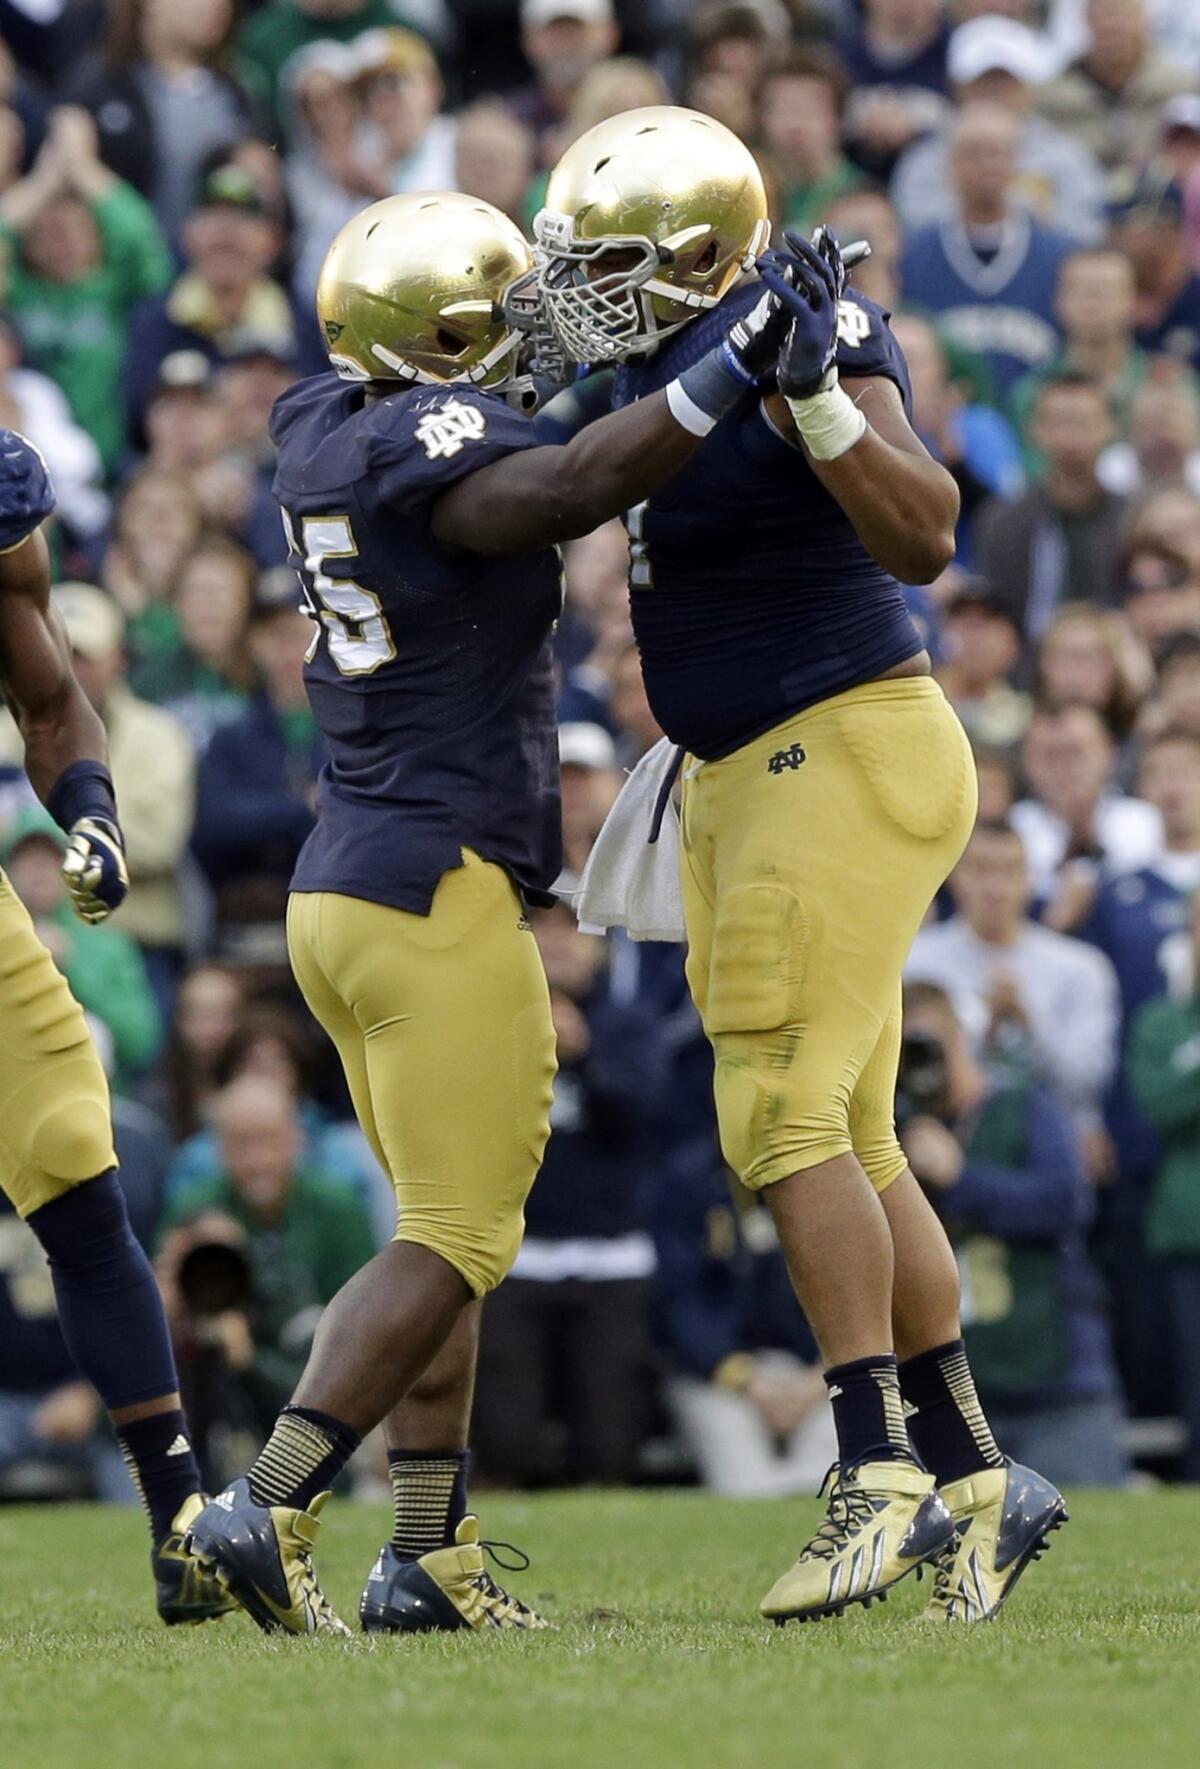 Notre Dame defensive linemen Prince Shembo, left, and Stephon Tuitt celebrate a sack in a win over Michigan State last week. Will the Fighting Irish pull off a win Saturday against Oklahoma?